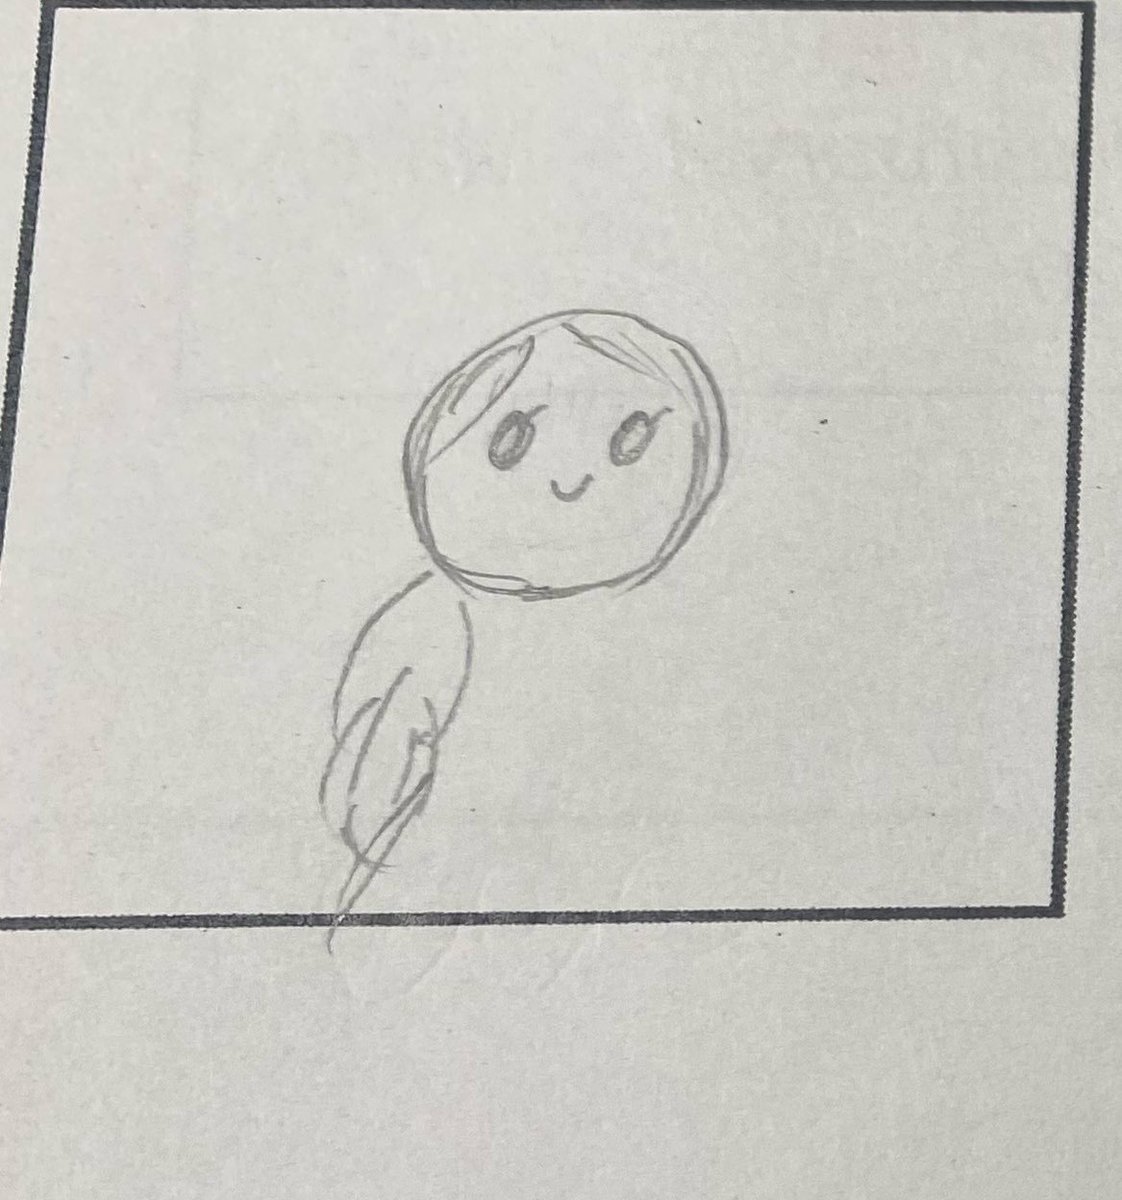 I taught my students how to write about personalities in English and asked them to describe one of their classmates/friends and then draw a portrait of them and 3 students chose me 😭😭😭😭😭